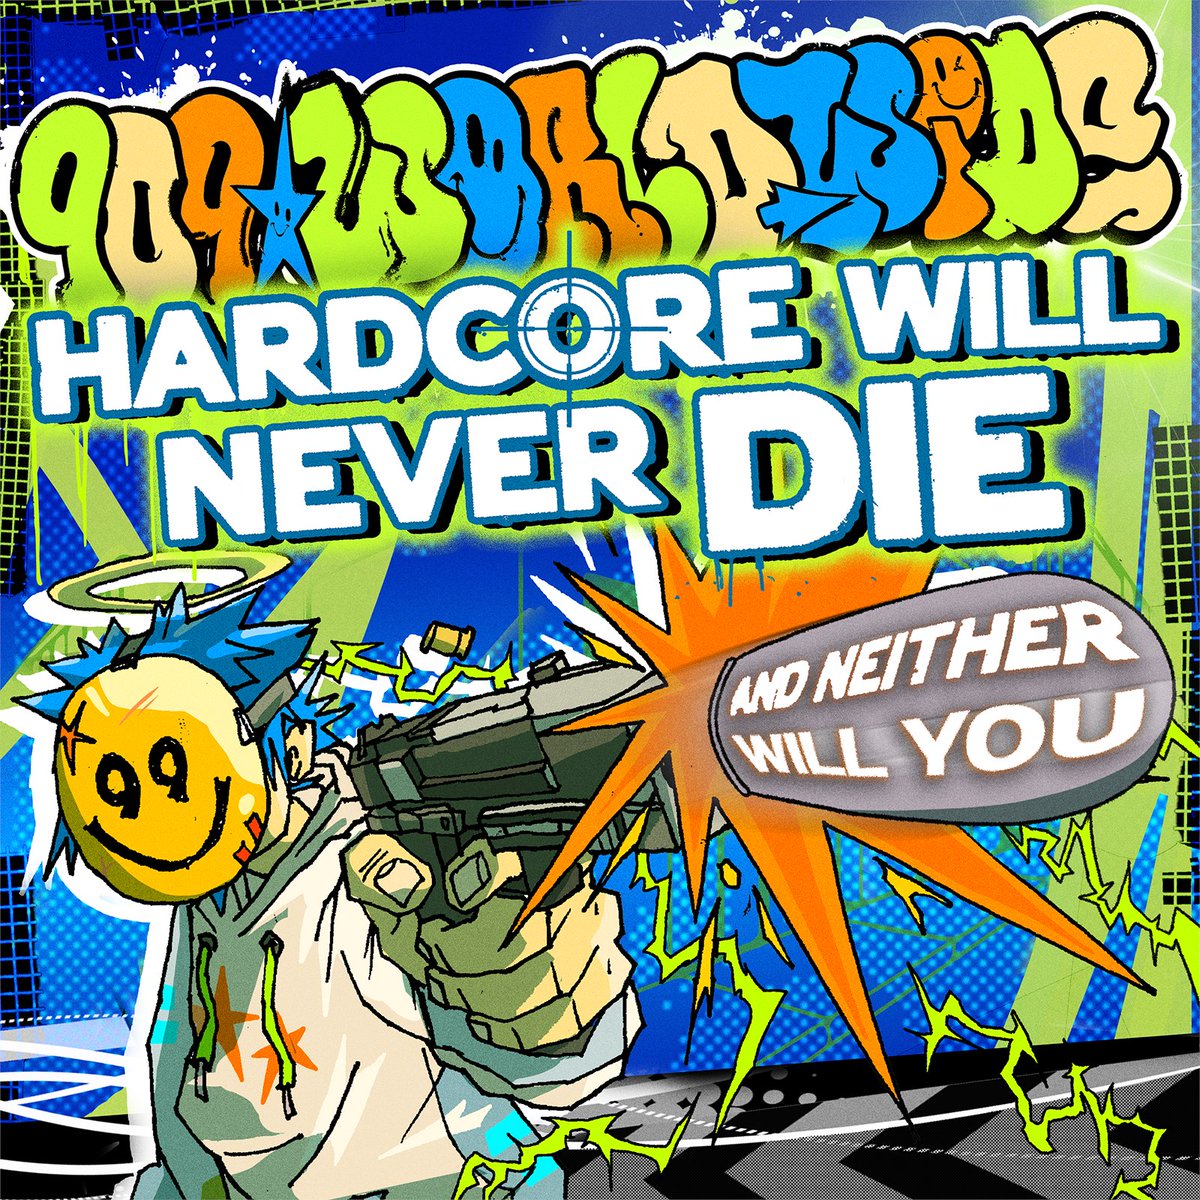 909 Worldwide presents: Hardcore Will Never Die, and Neither Will You IT'S FINALLY HERE... YEARS IN THE MAKING... THE FIRST 909 WORLDWIDE COMPILATION TAPE!! OUT NOW (9.09) ON BANDCAMP AND SOUNDCLOUD HITTING ALL STREAMING SERVICES SOON™